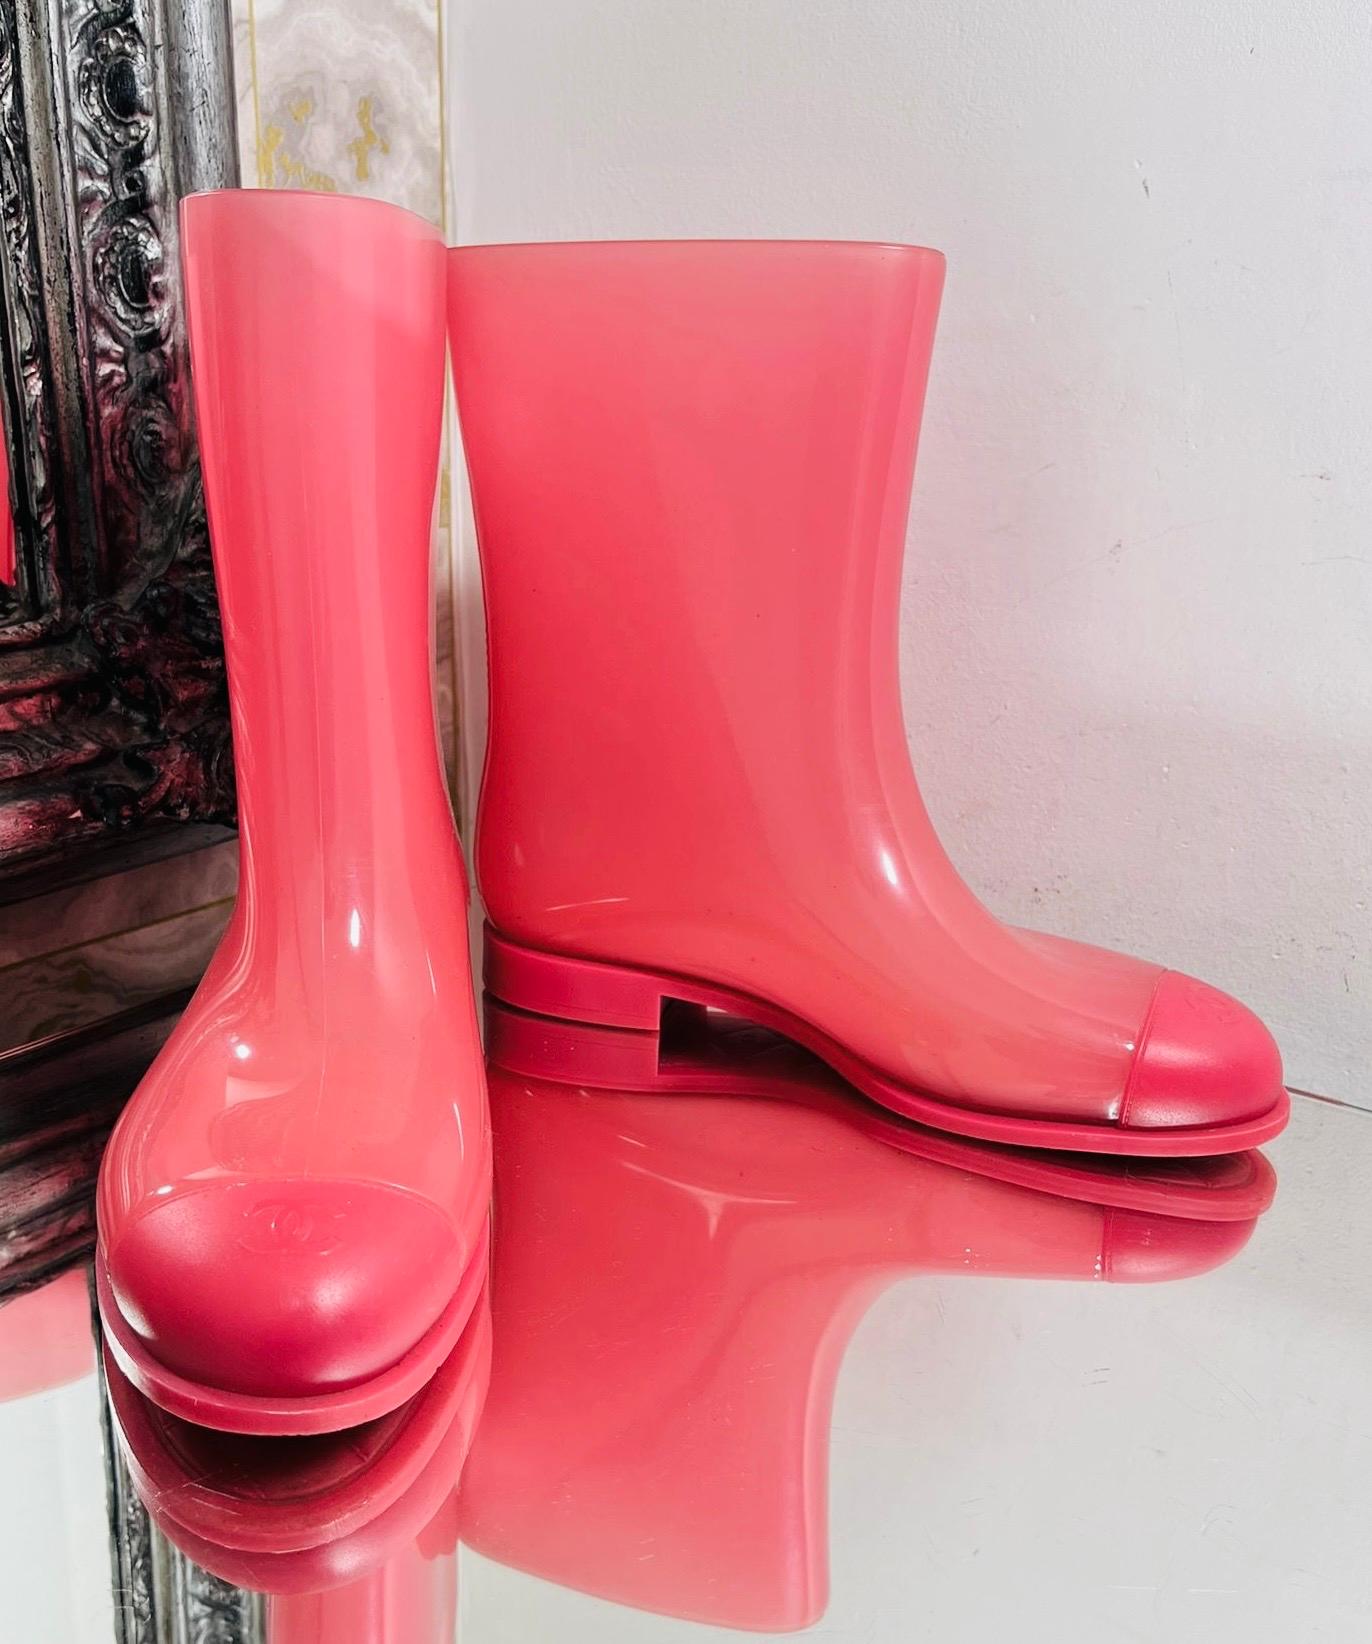 Chanel 'CC' Logo Wellington Boots In Excellent Condition For Sale In London, GB